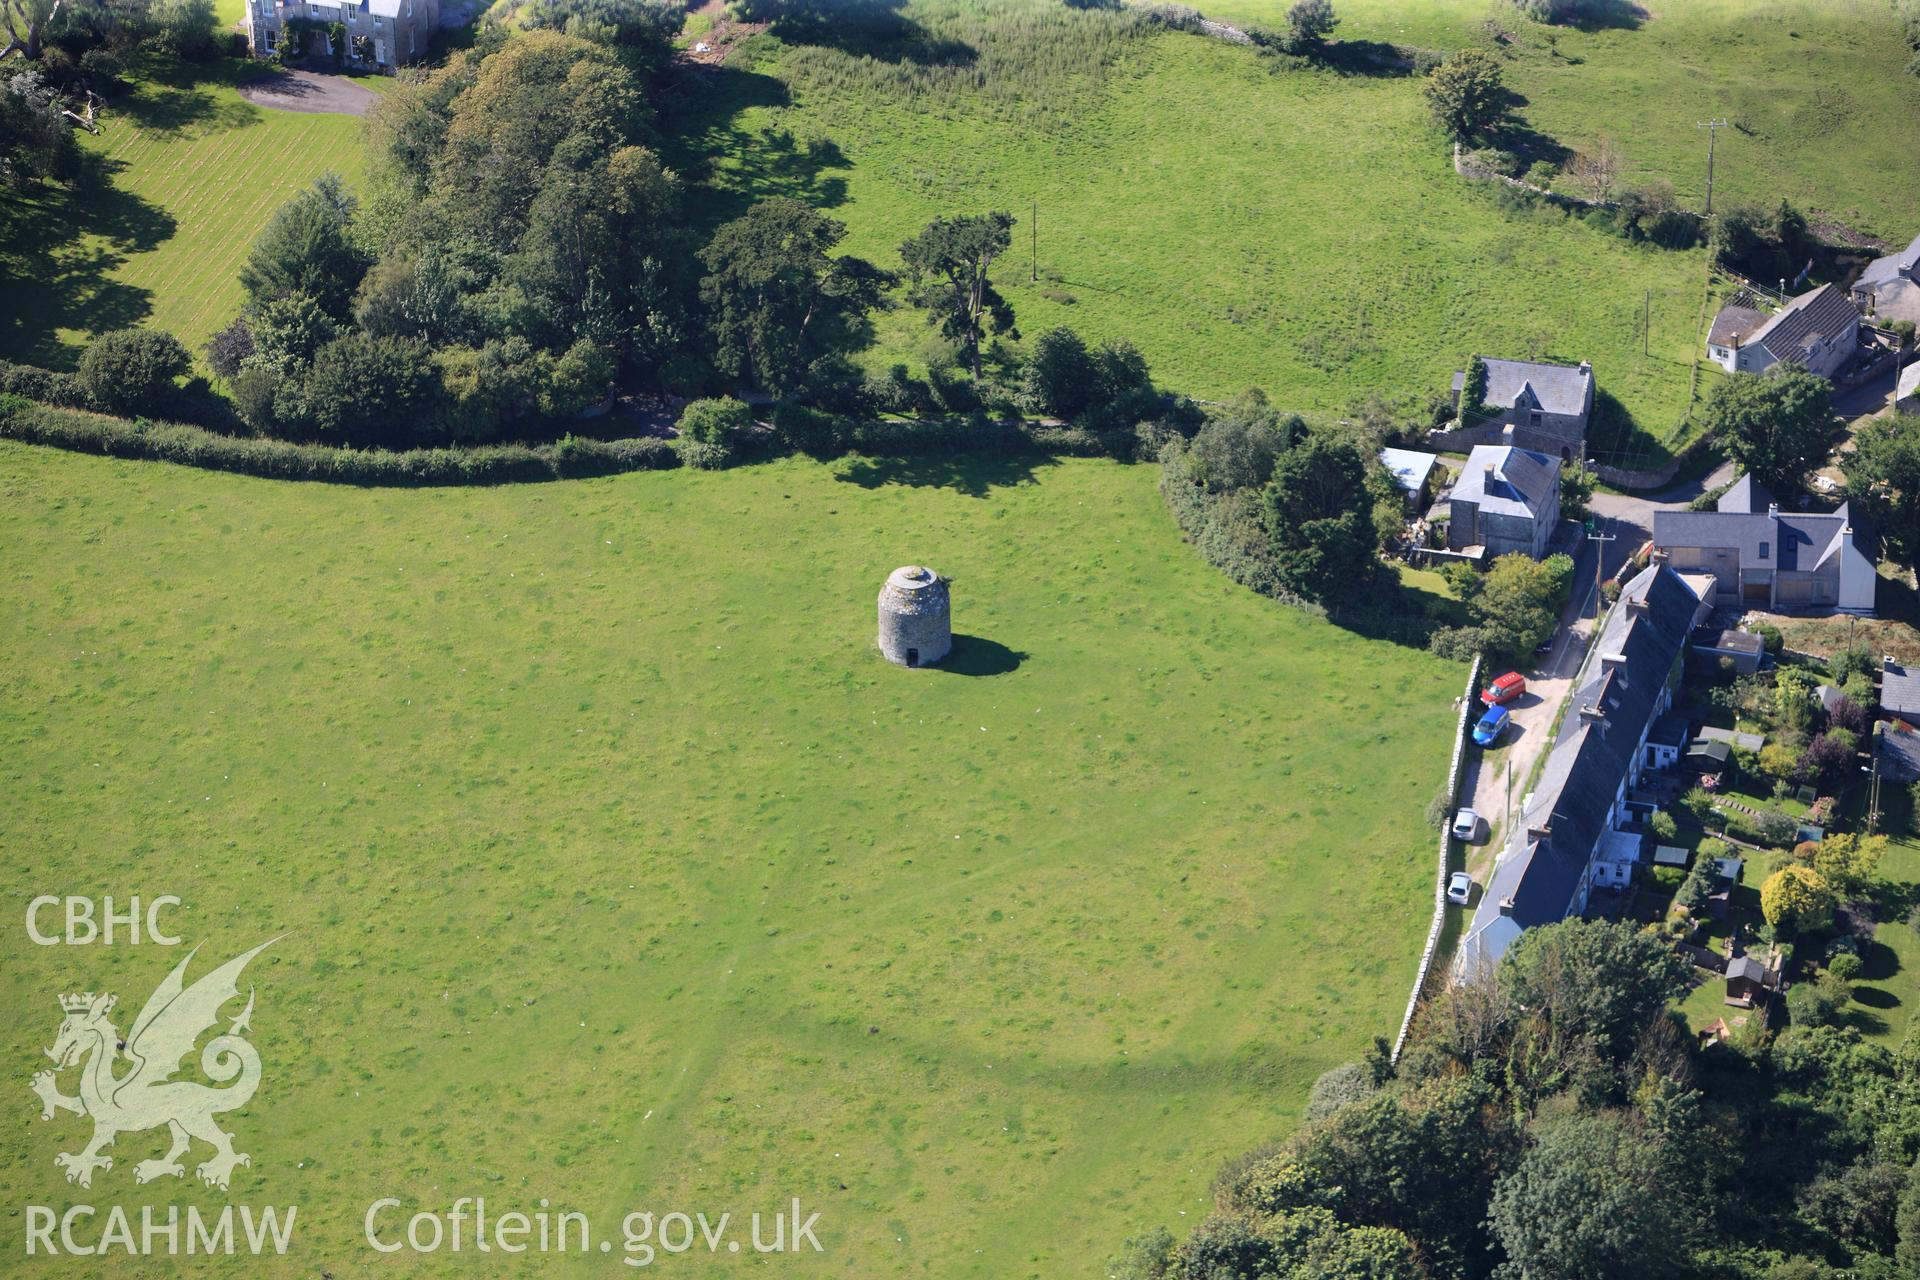 RCAHMW colour oblique photograph of Llantwit Major Grange, with Dovecote. Taken by Toby Driver on 24/07/2012.